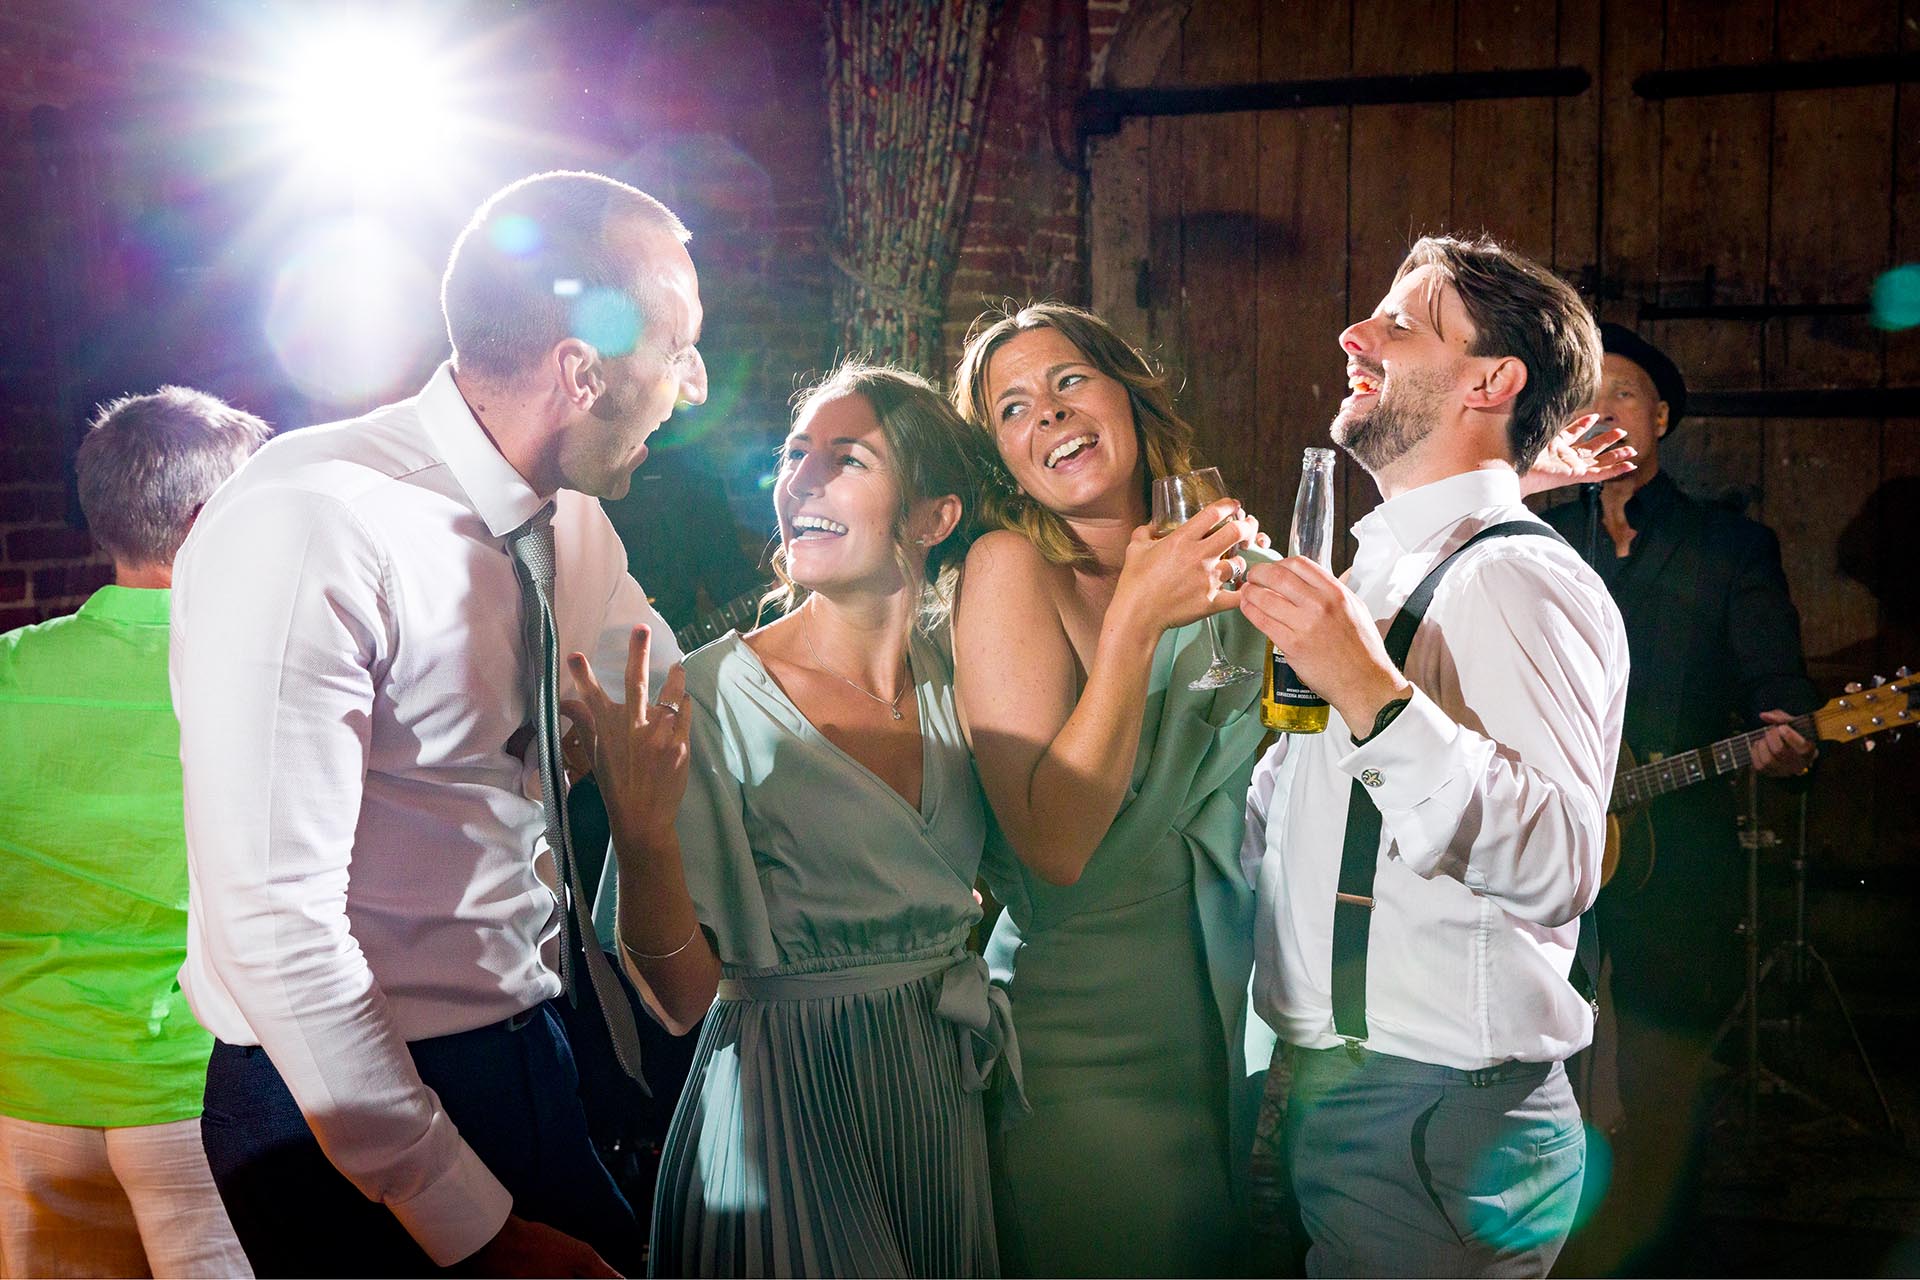 Candid wedding photography by Essex wedding photographer at Leez Priory Great Leighs Chelmsford